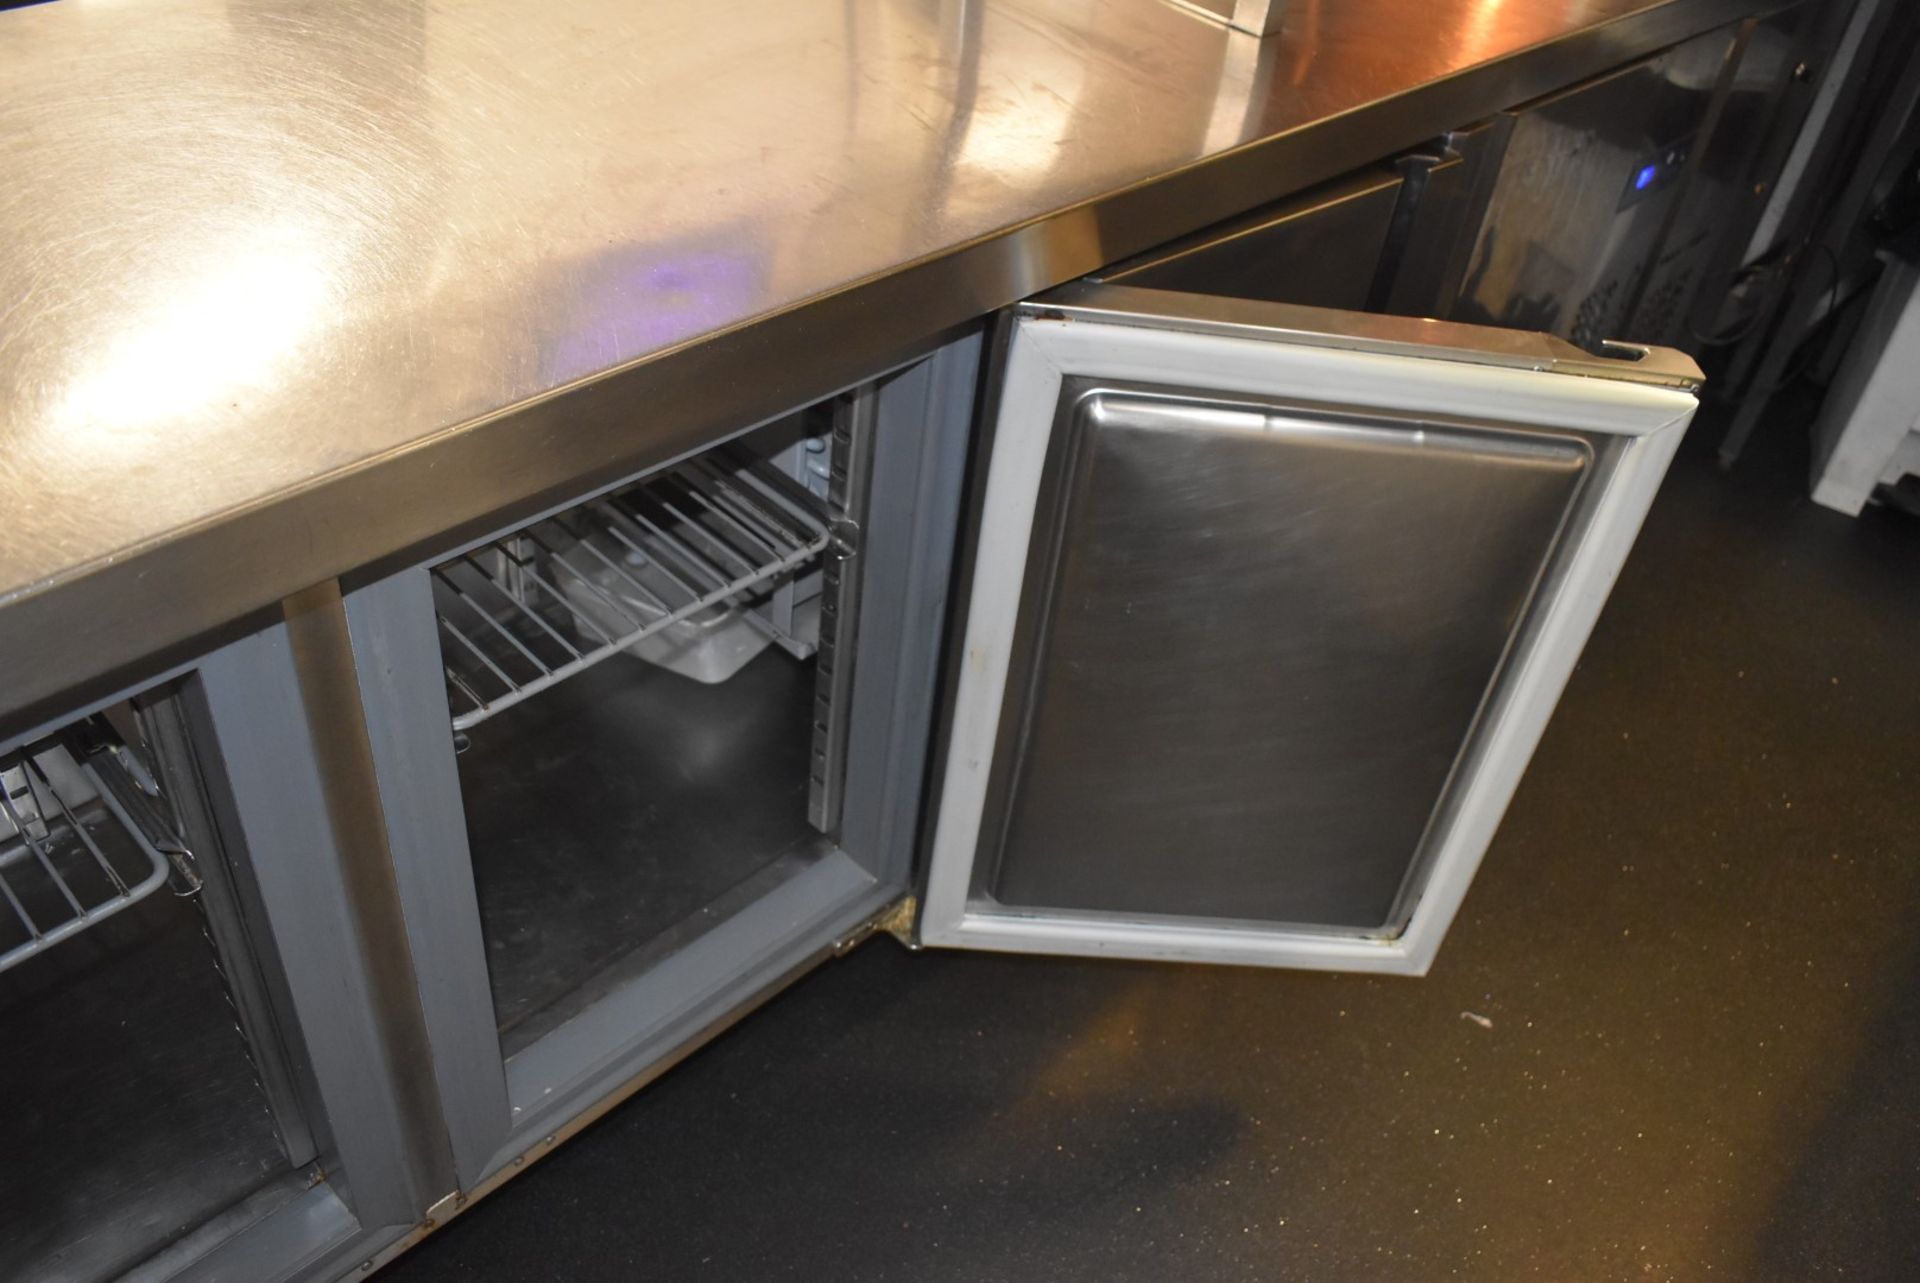 1 x Infrico 4 Door Countertop Refrigerator With Passthrough Shelves and Ticket Rails - Image 13 of 18